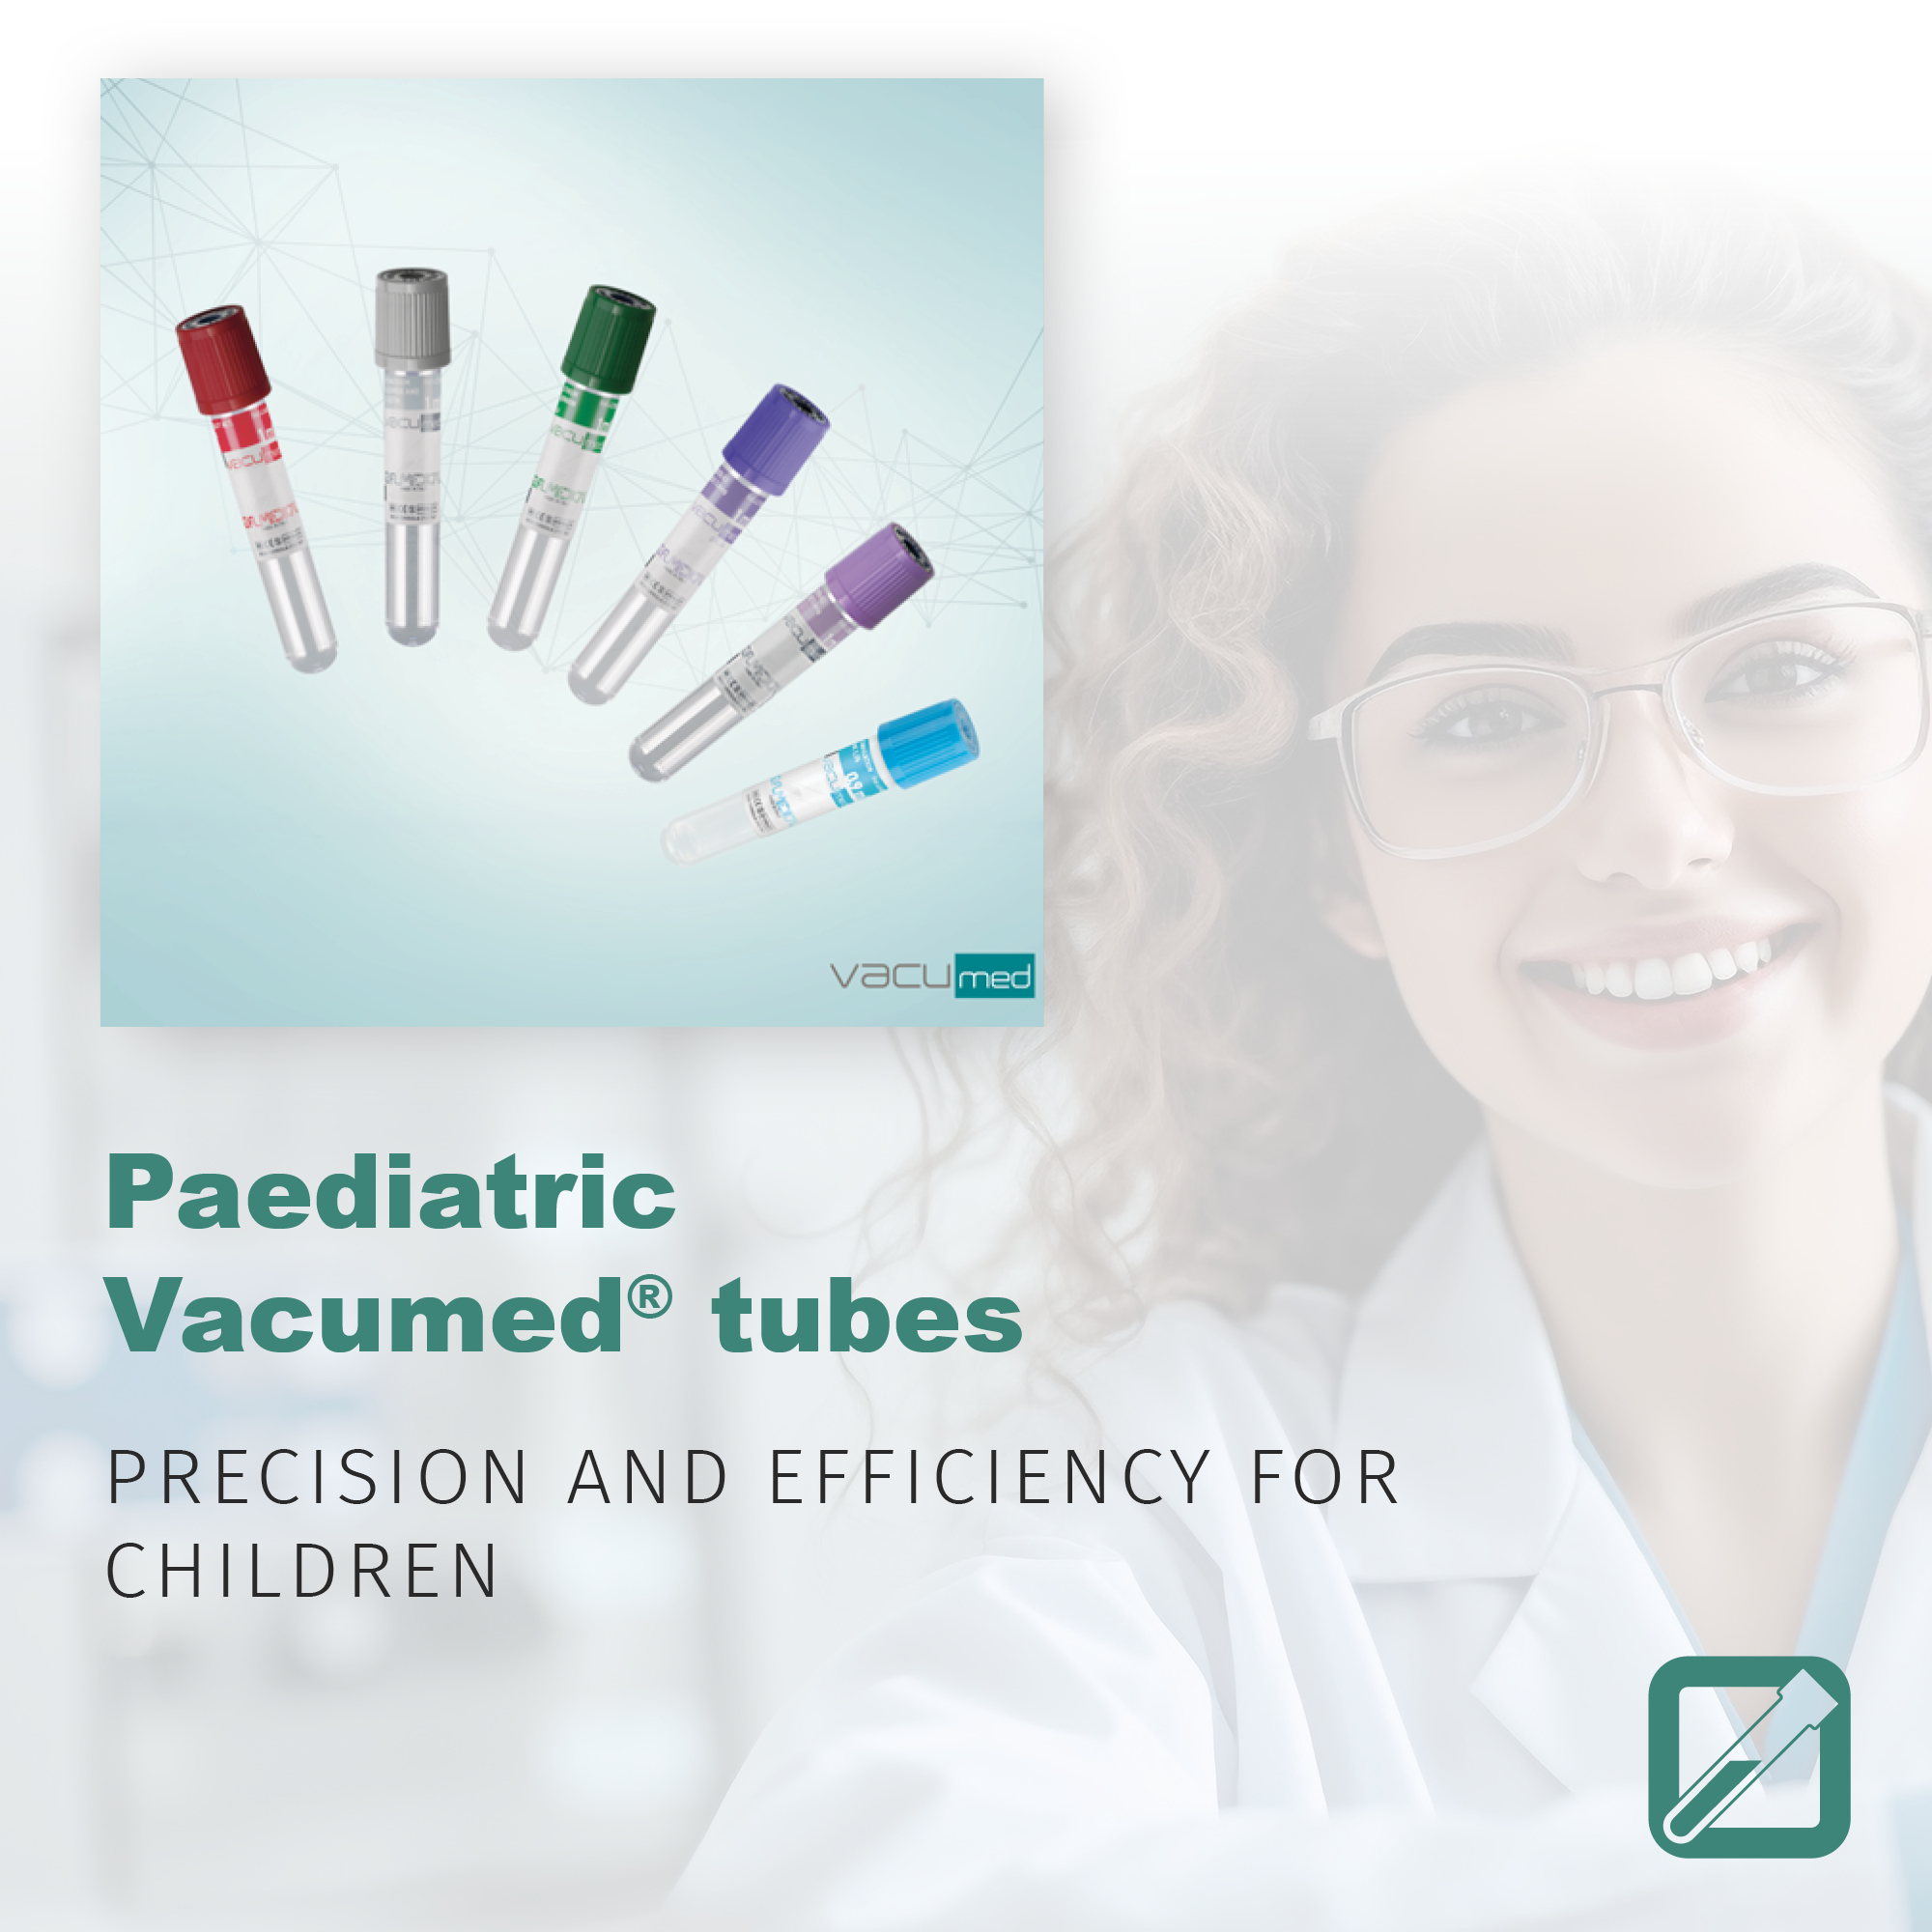 Paediatric Vacumed® tubes: precision and efficiency for children